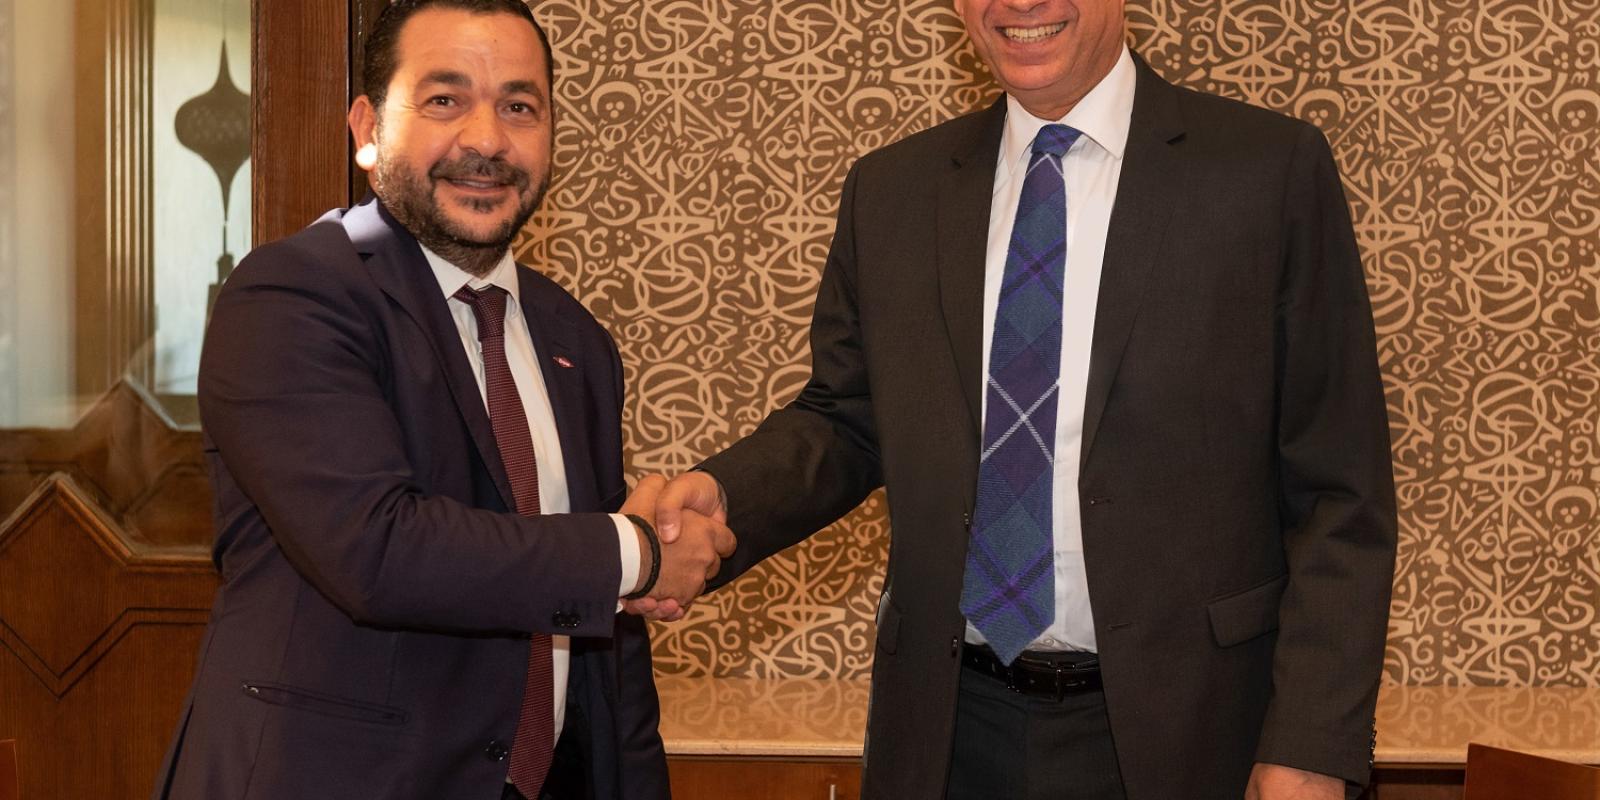 AUC Provost Ehab Abdel-Rahman and Dow Egypt's Country Manager Momen Adel sign the AUC-Dow research and development partnership